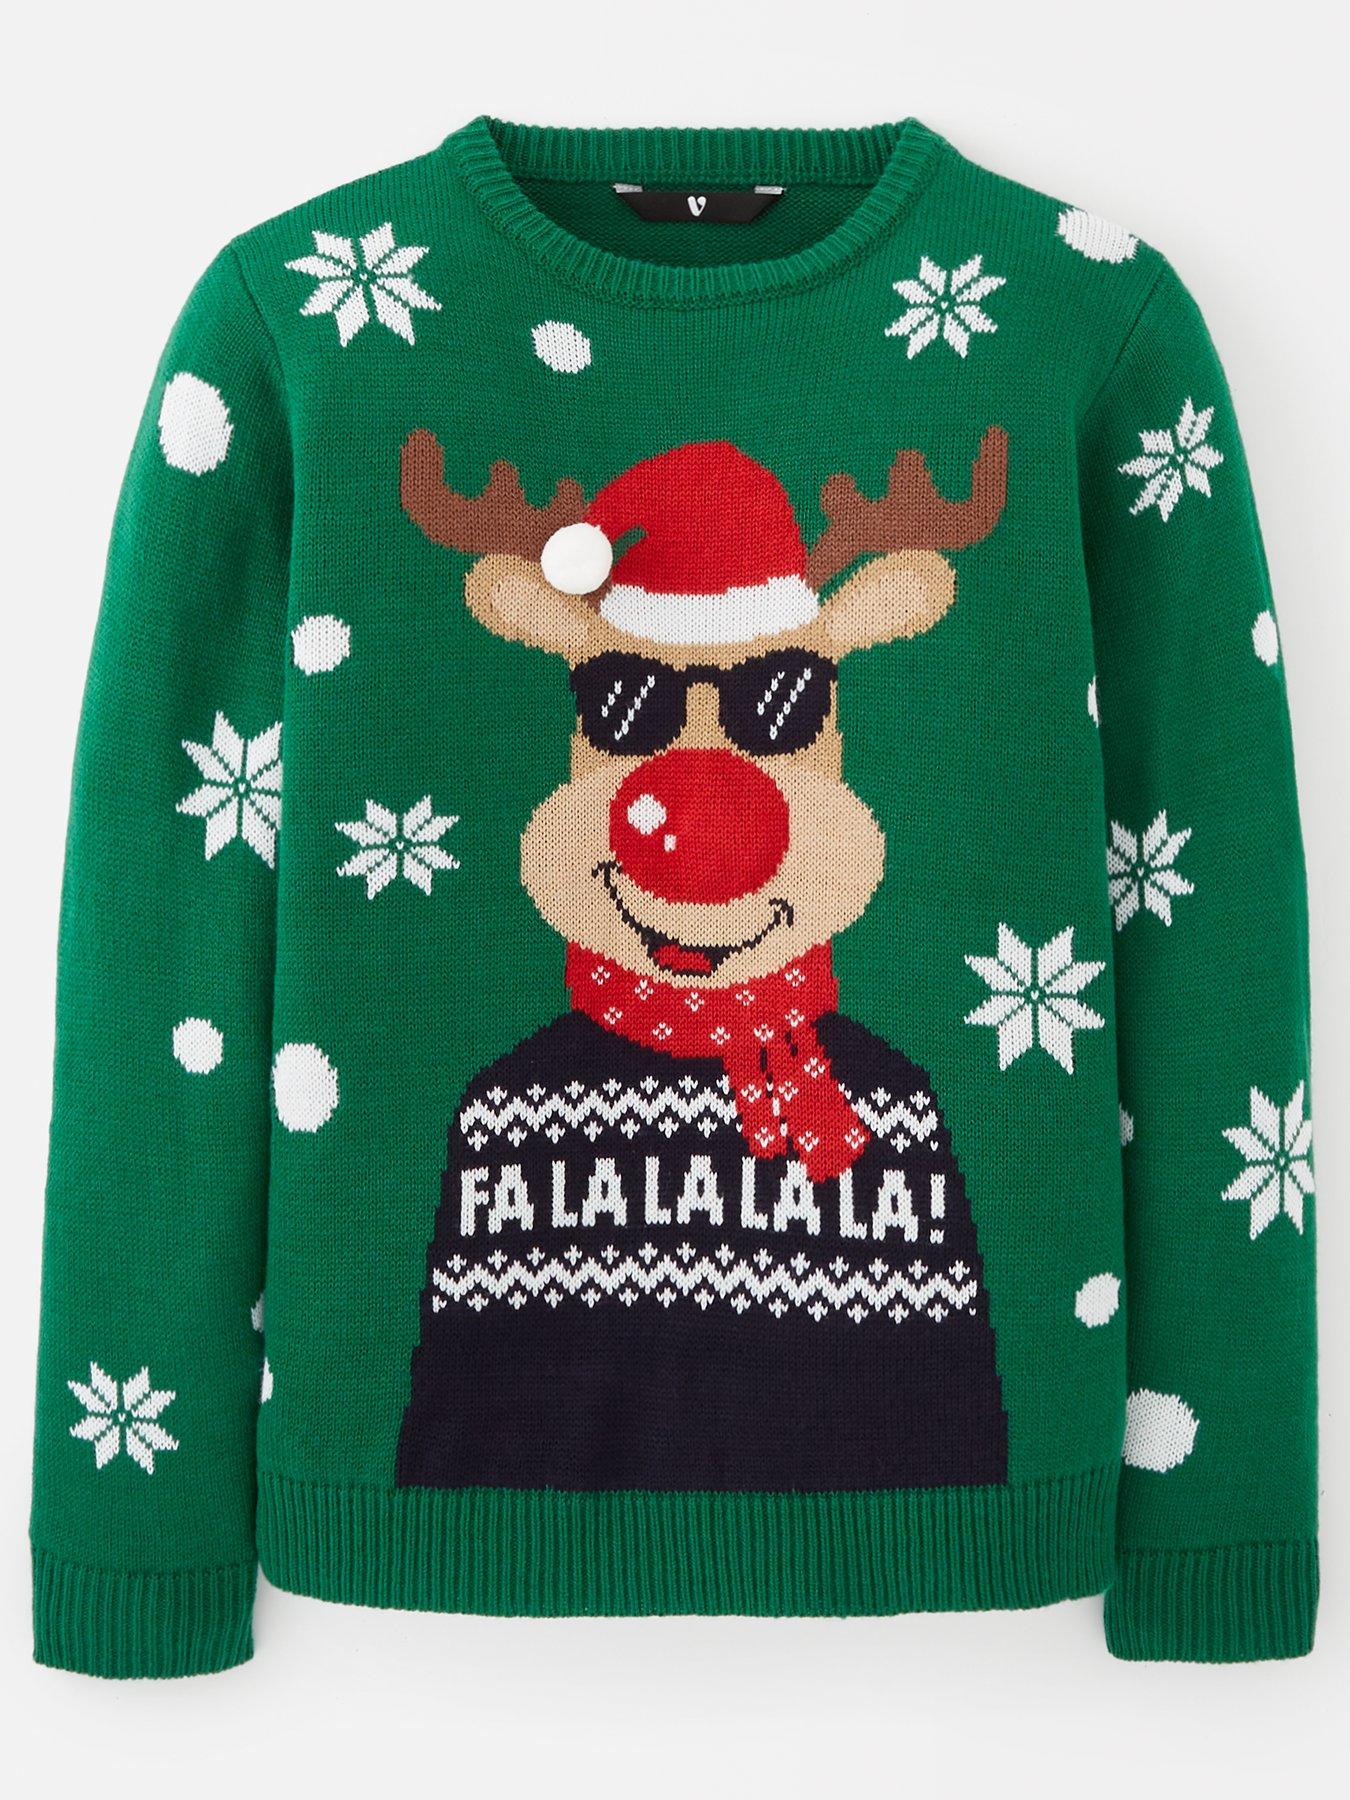 V by Very Boys Rudolph Christmas Jumper with Lights and Music